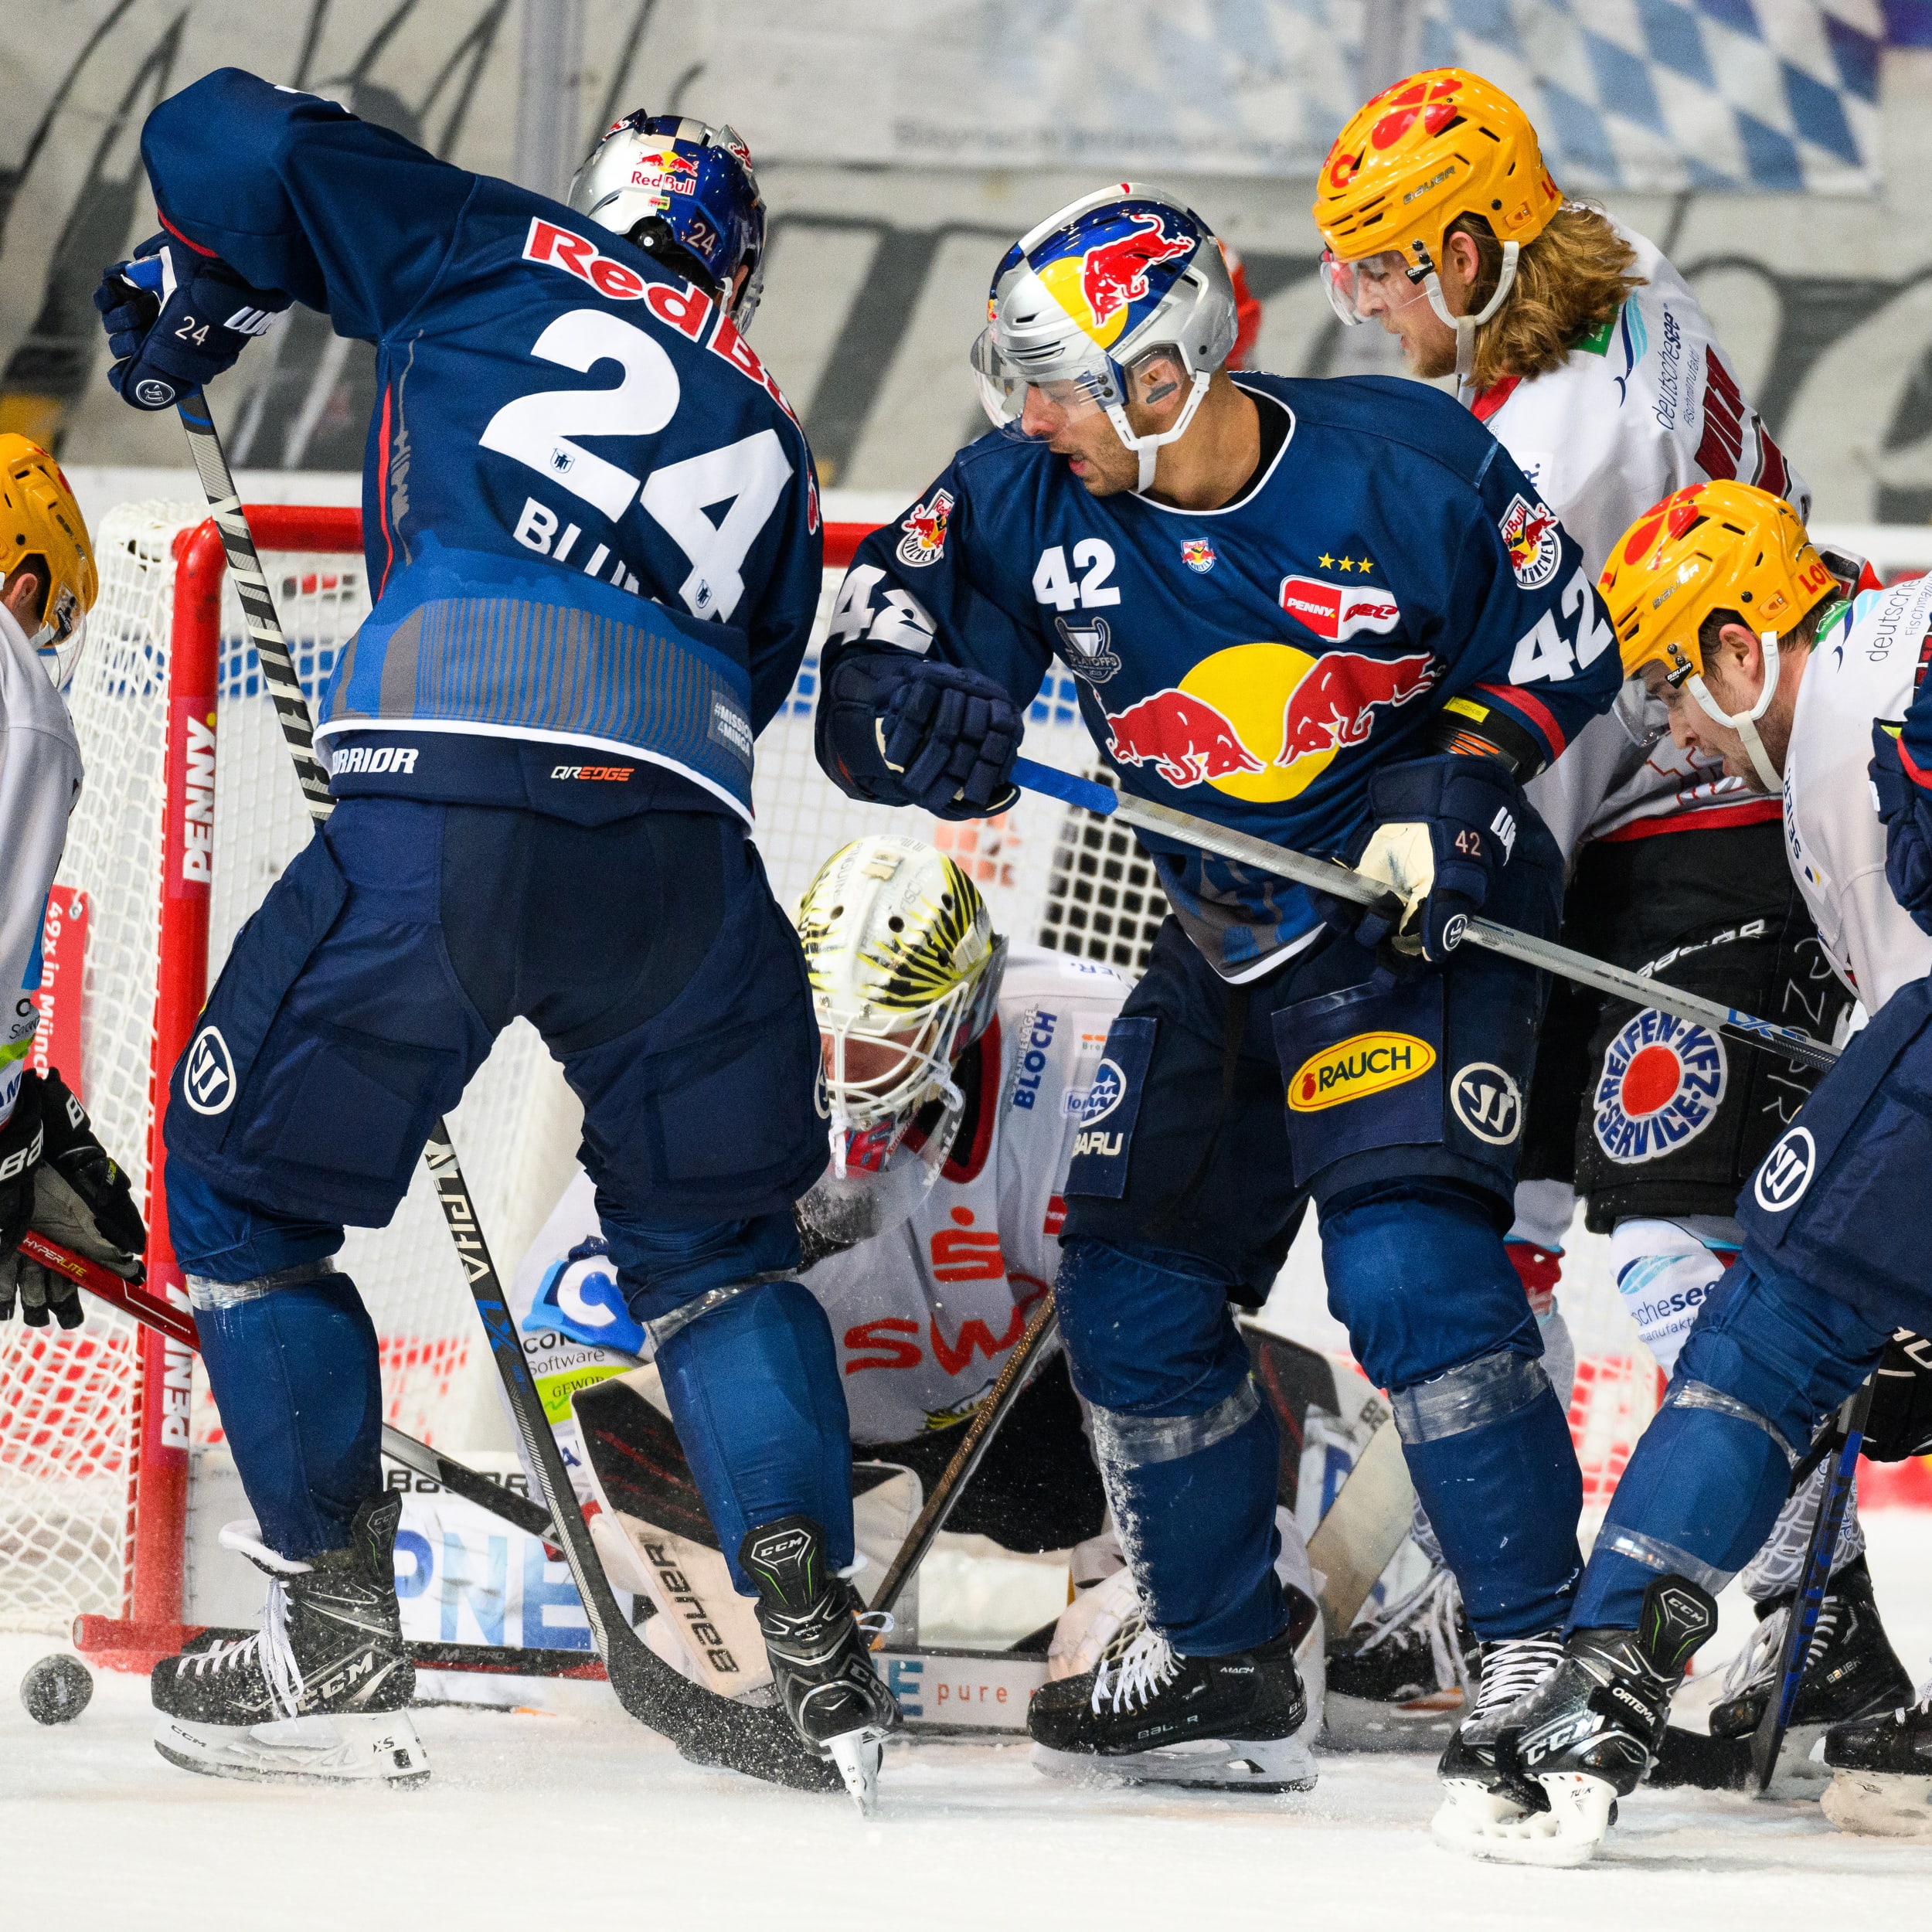 Red Bulls lose to Bremerhaven in first quarterfinal game